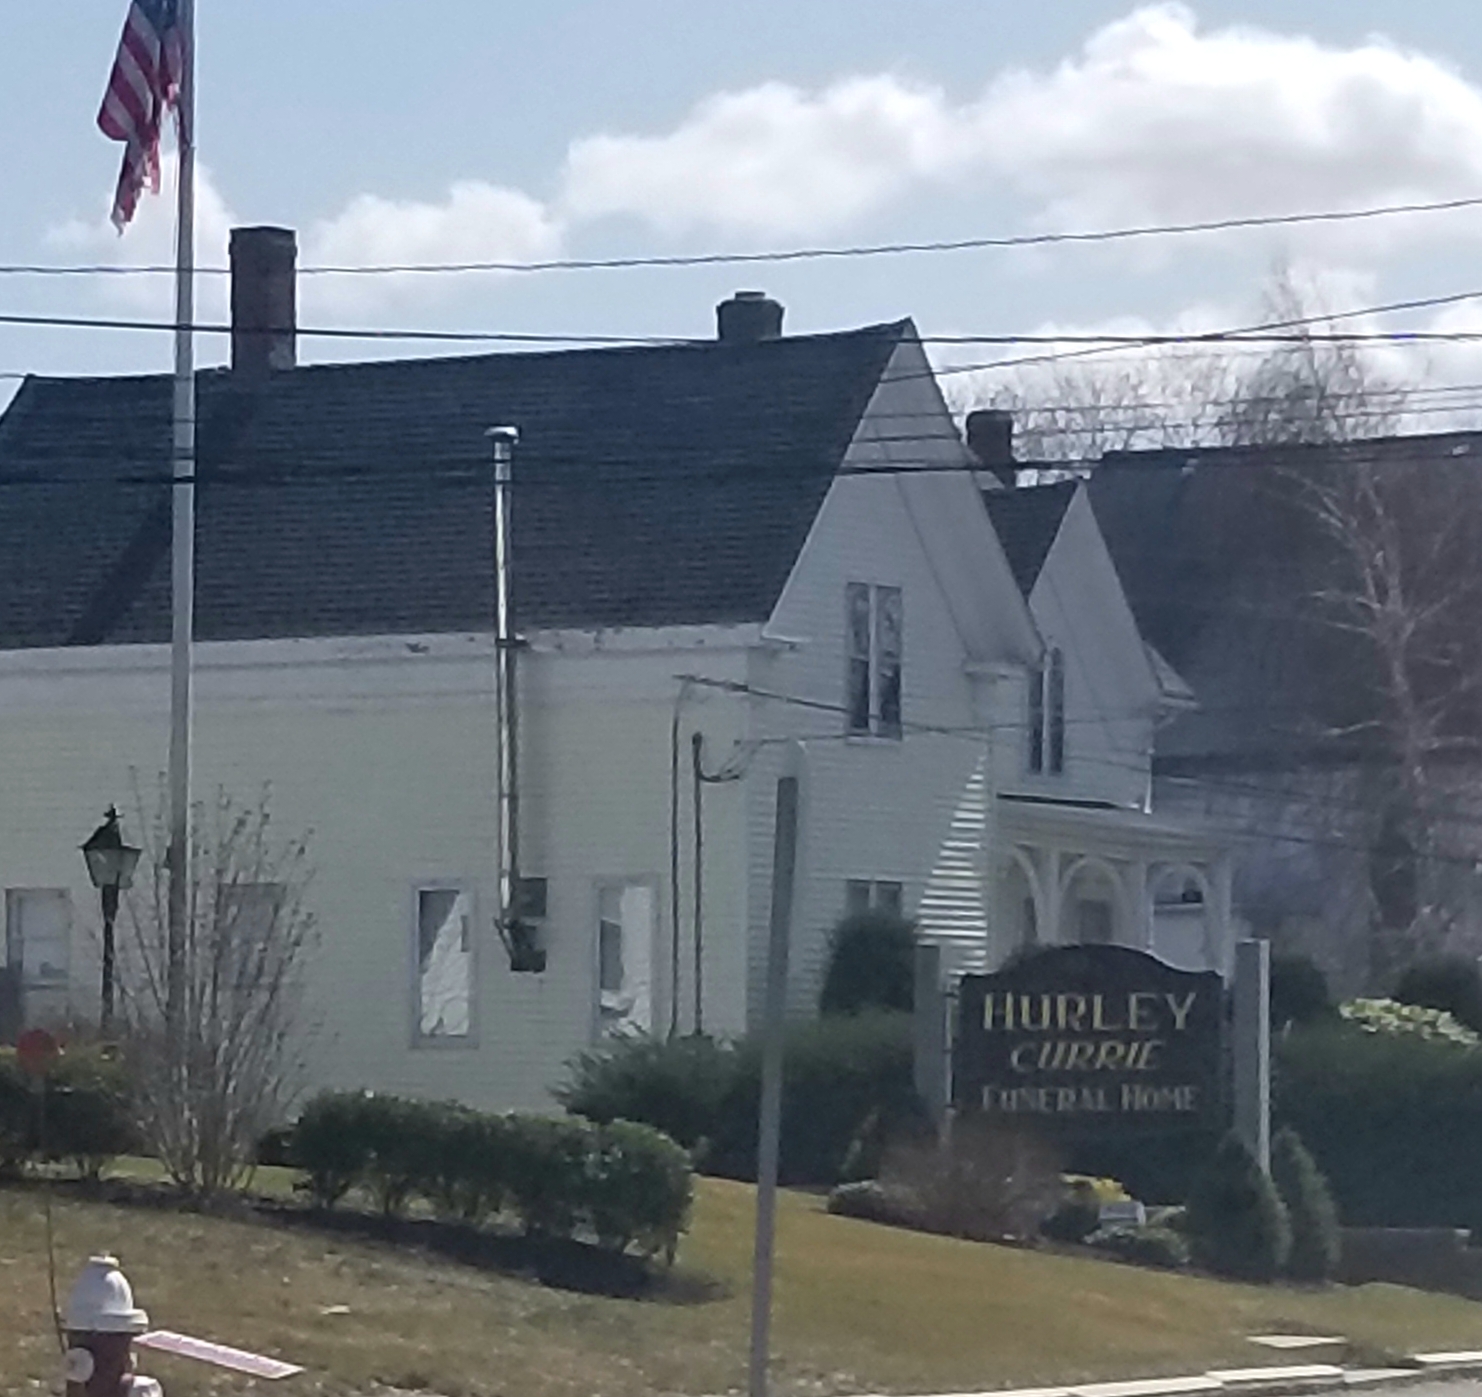 Hurley Funeral Home